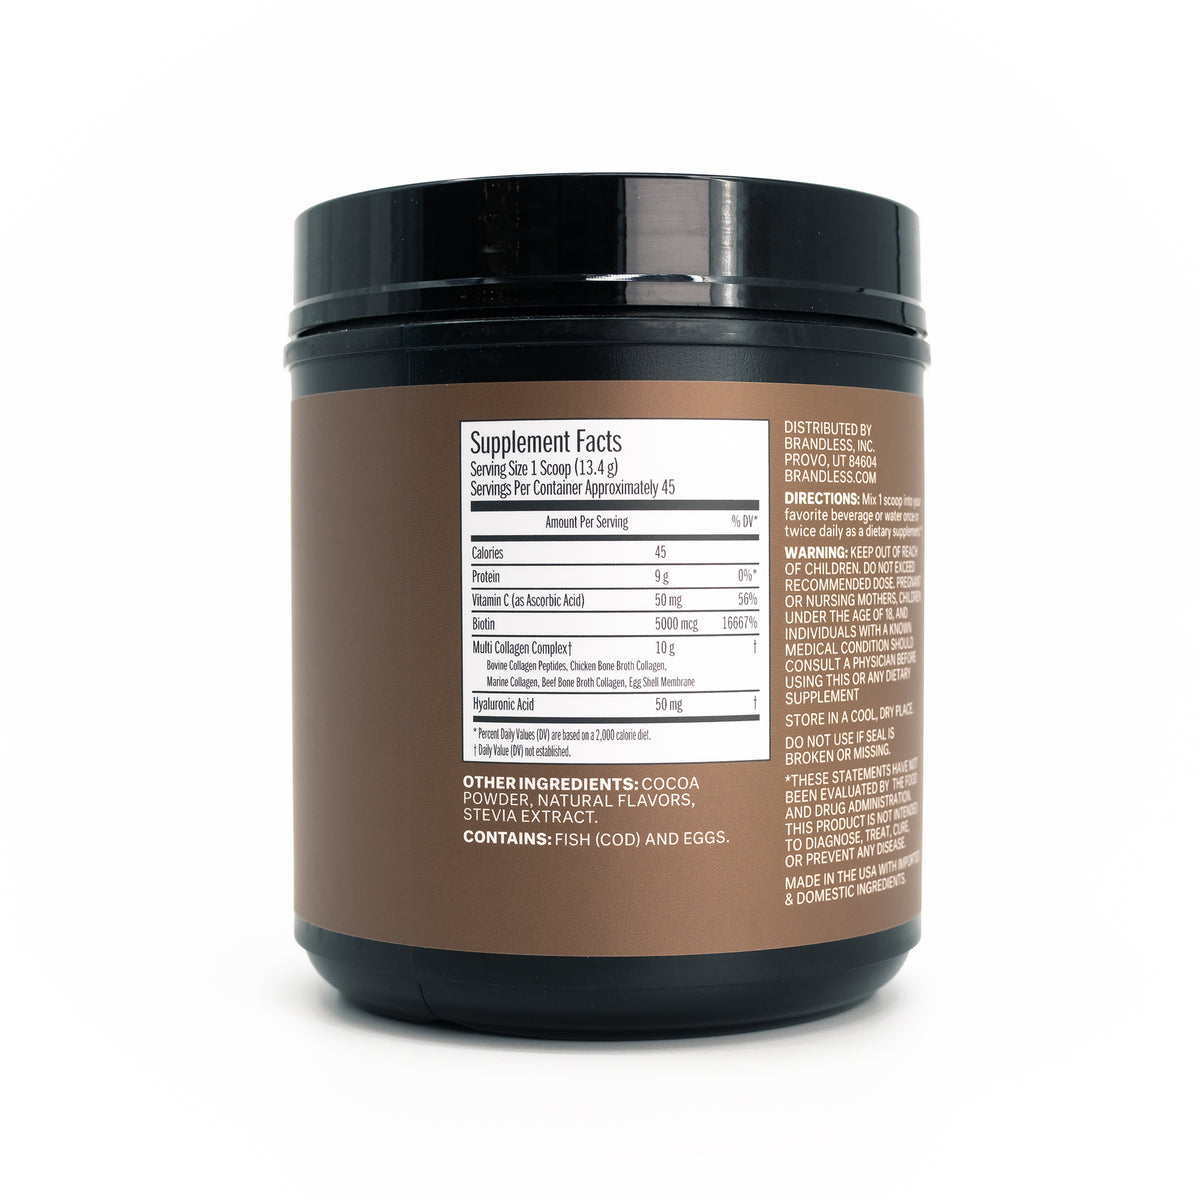 Product photo, back nutrition panel, serving size 1 scoop, 13.4g.  Servings per container approximately 45.  Amounts per serving: Calories: 45, Protein: 9g. Vitamin C (as ascorbic acid): 50mg/56%. Biotin: 5000mg/16667%. Multi-collagen complex: 10g. Hyaluronic acid: 50mg.